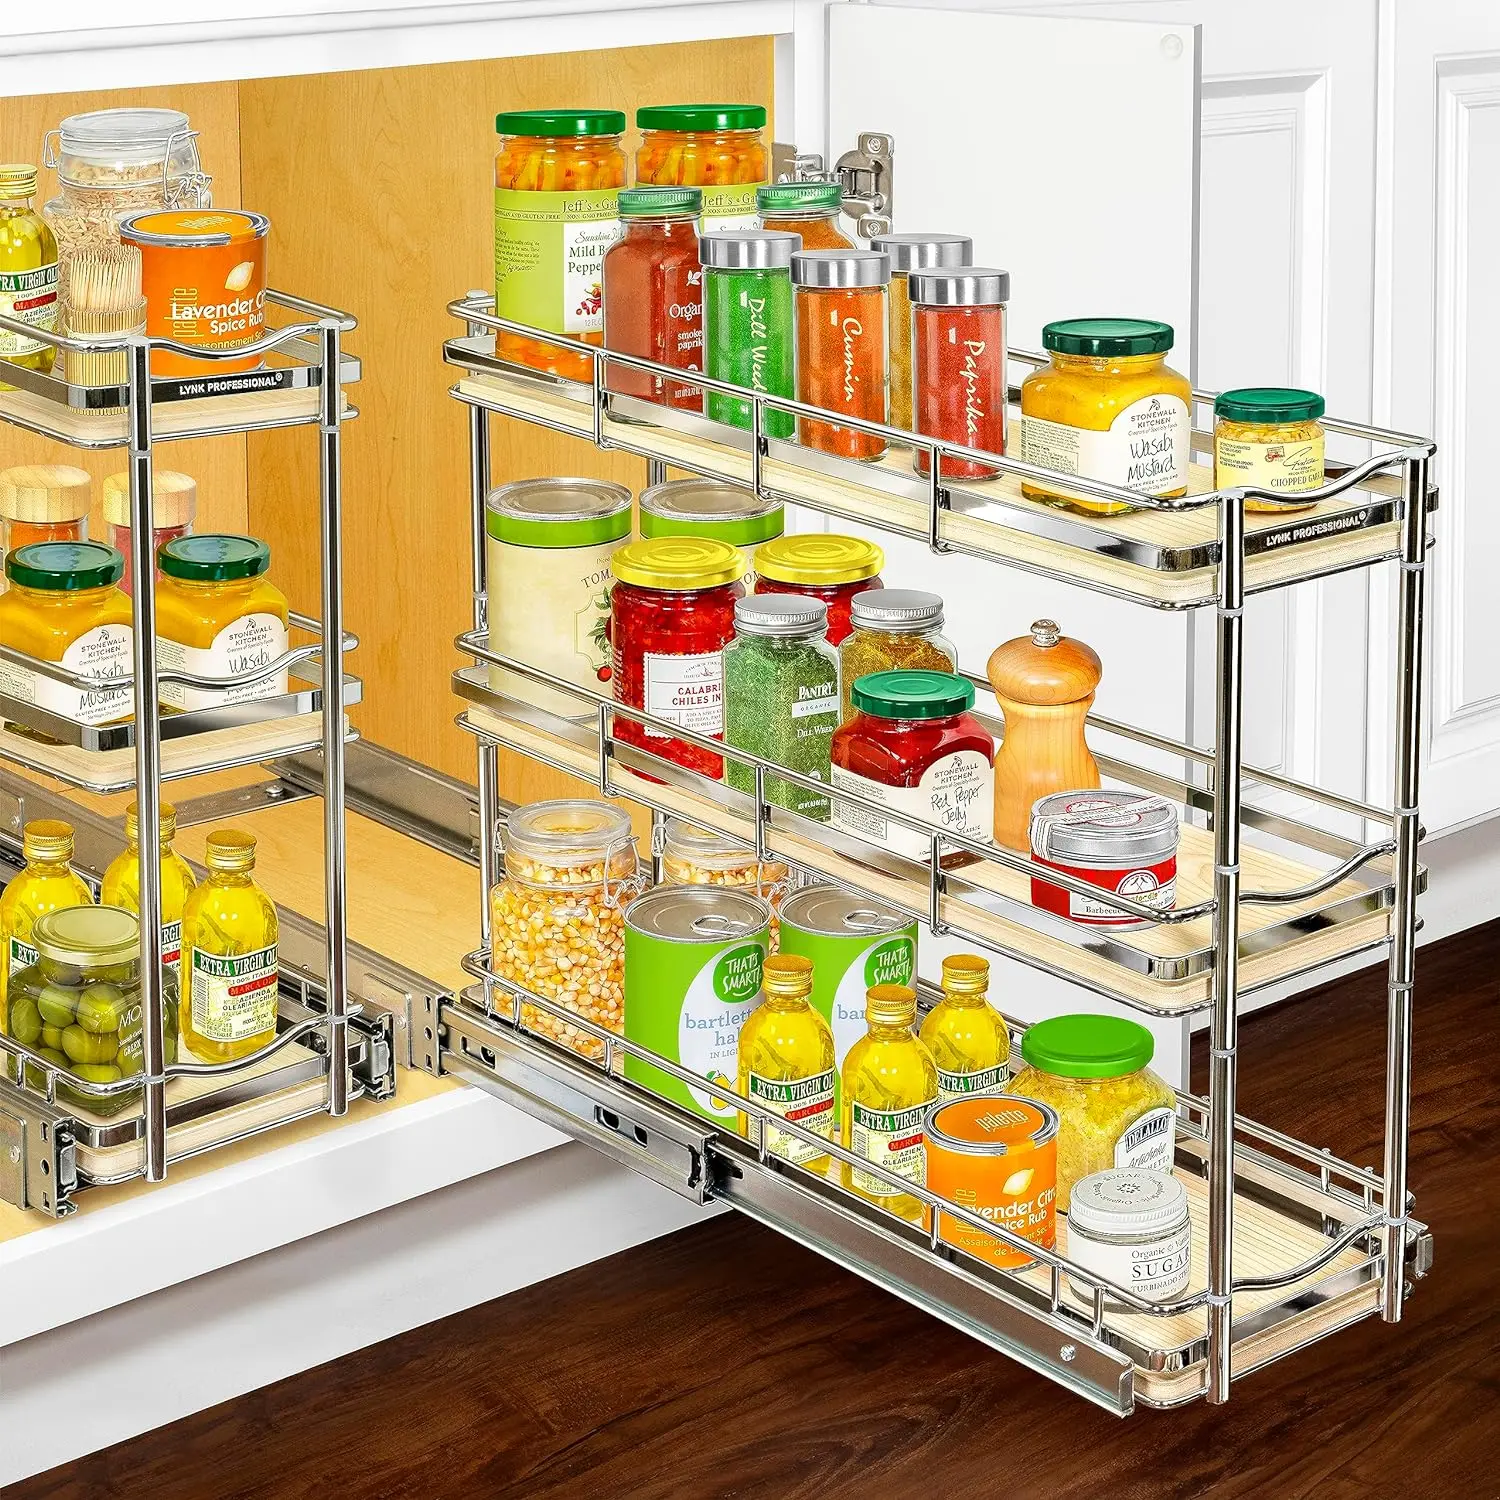 

Pull Out Cabinet Organizer - 6”x21”-Sliding Spice, Bottle Storage Narrow Slide Out Drawers for Kitchen Cabinets,Roll Out Shelves